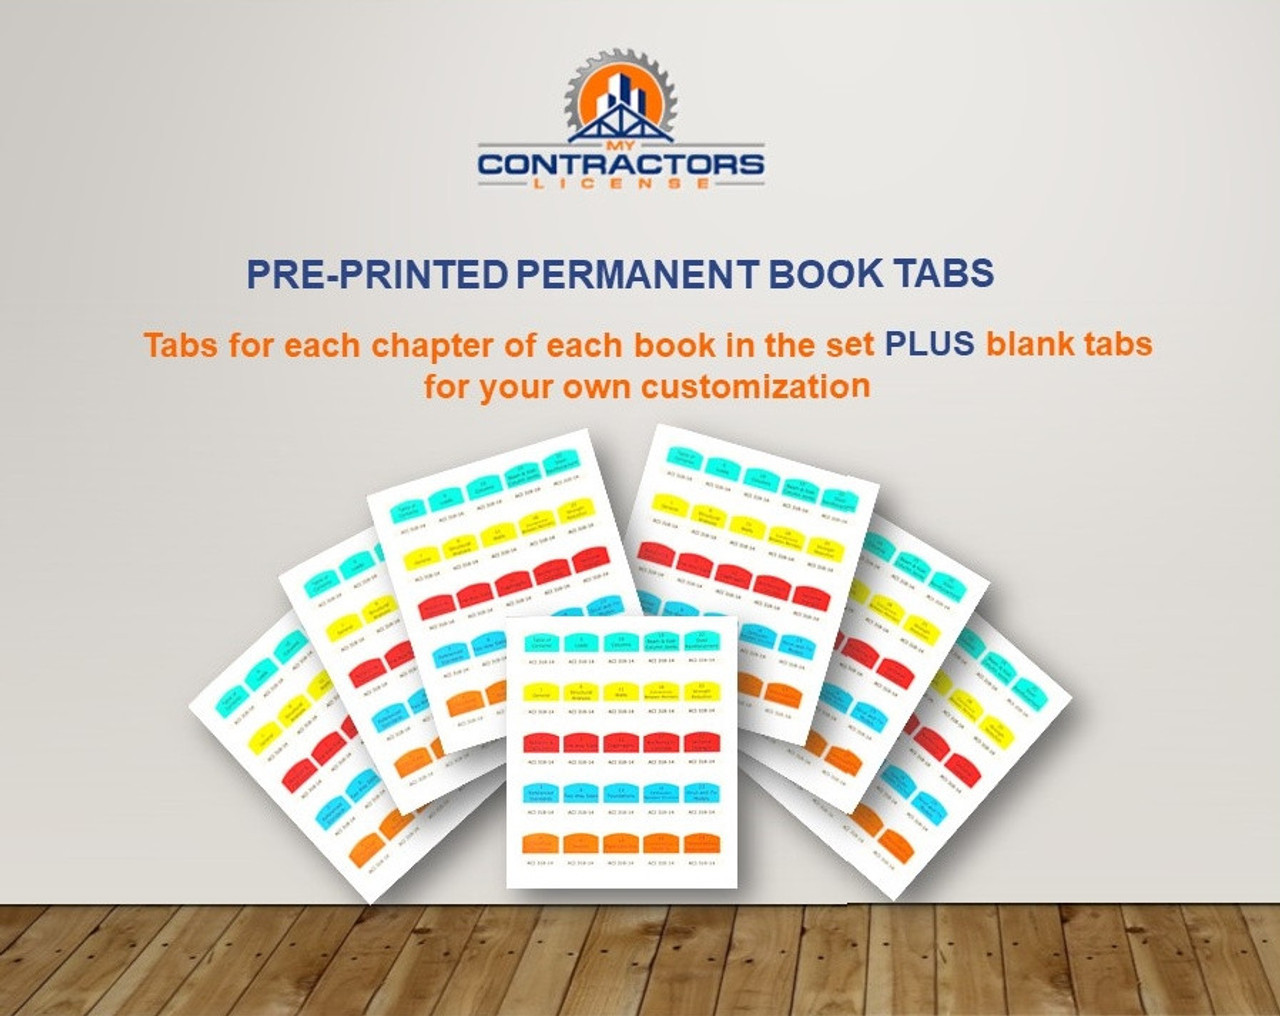 Printed Book Tabs for South Carolina Residential Contractor